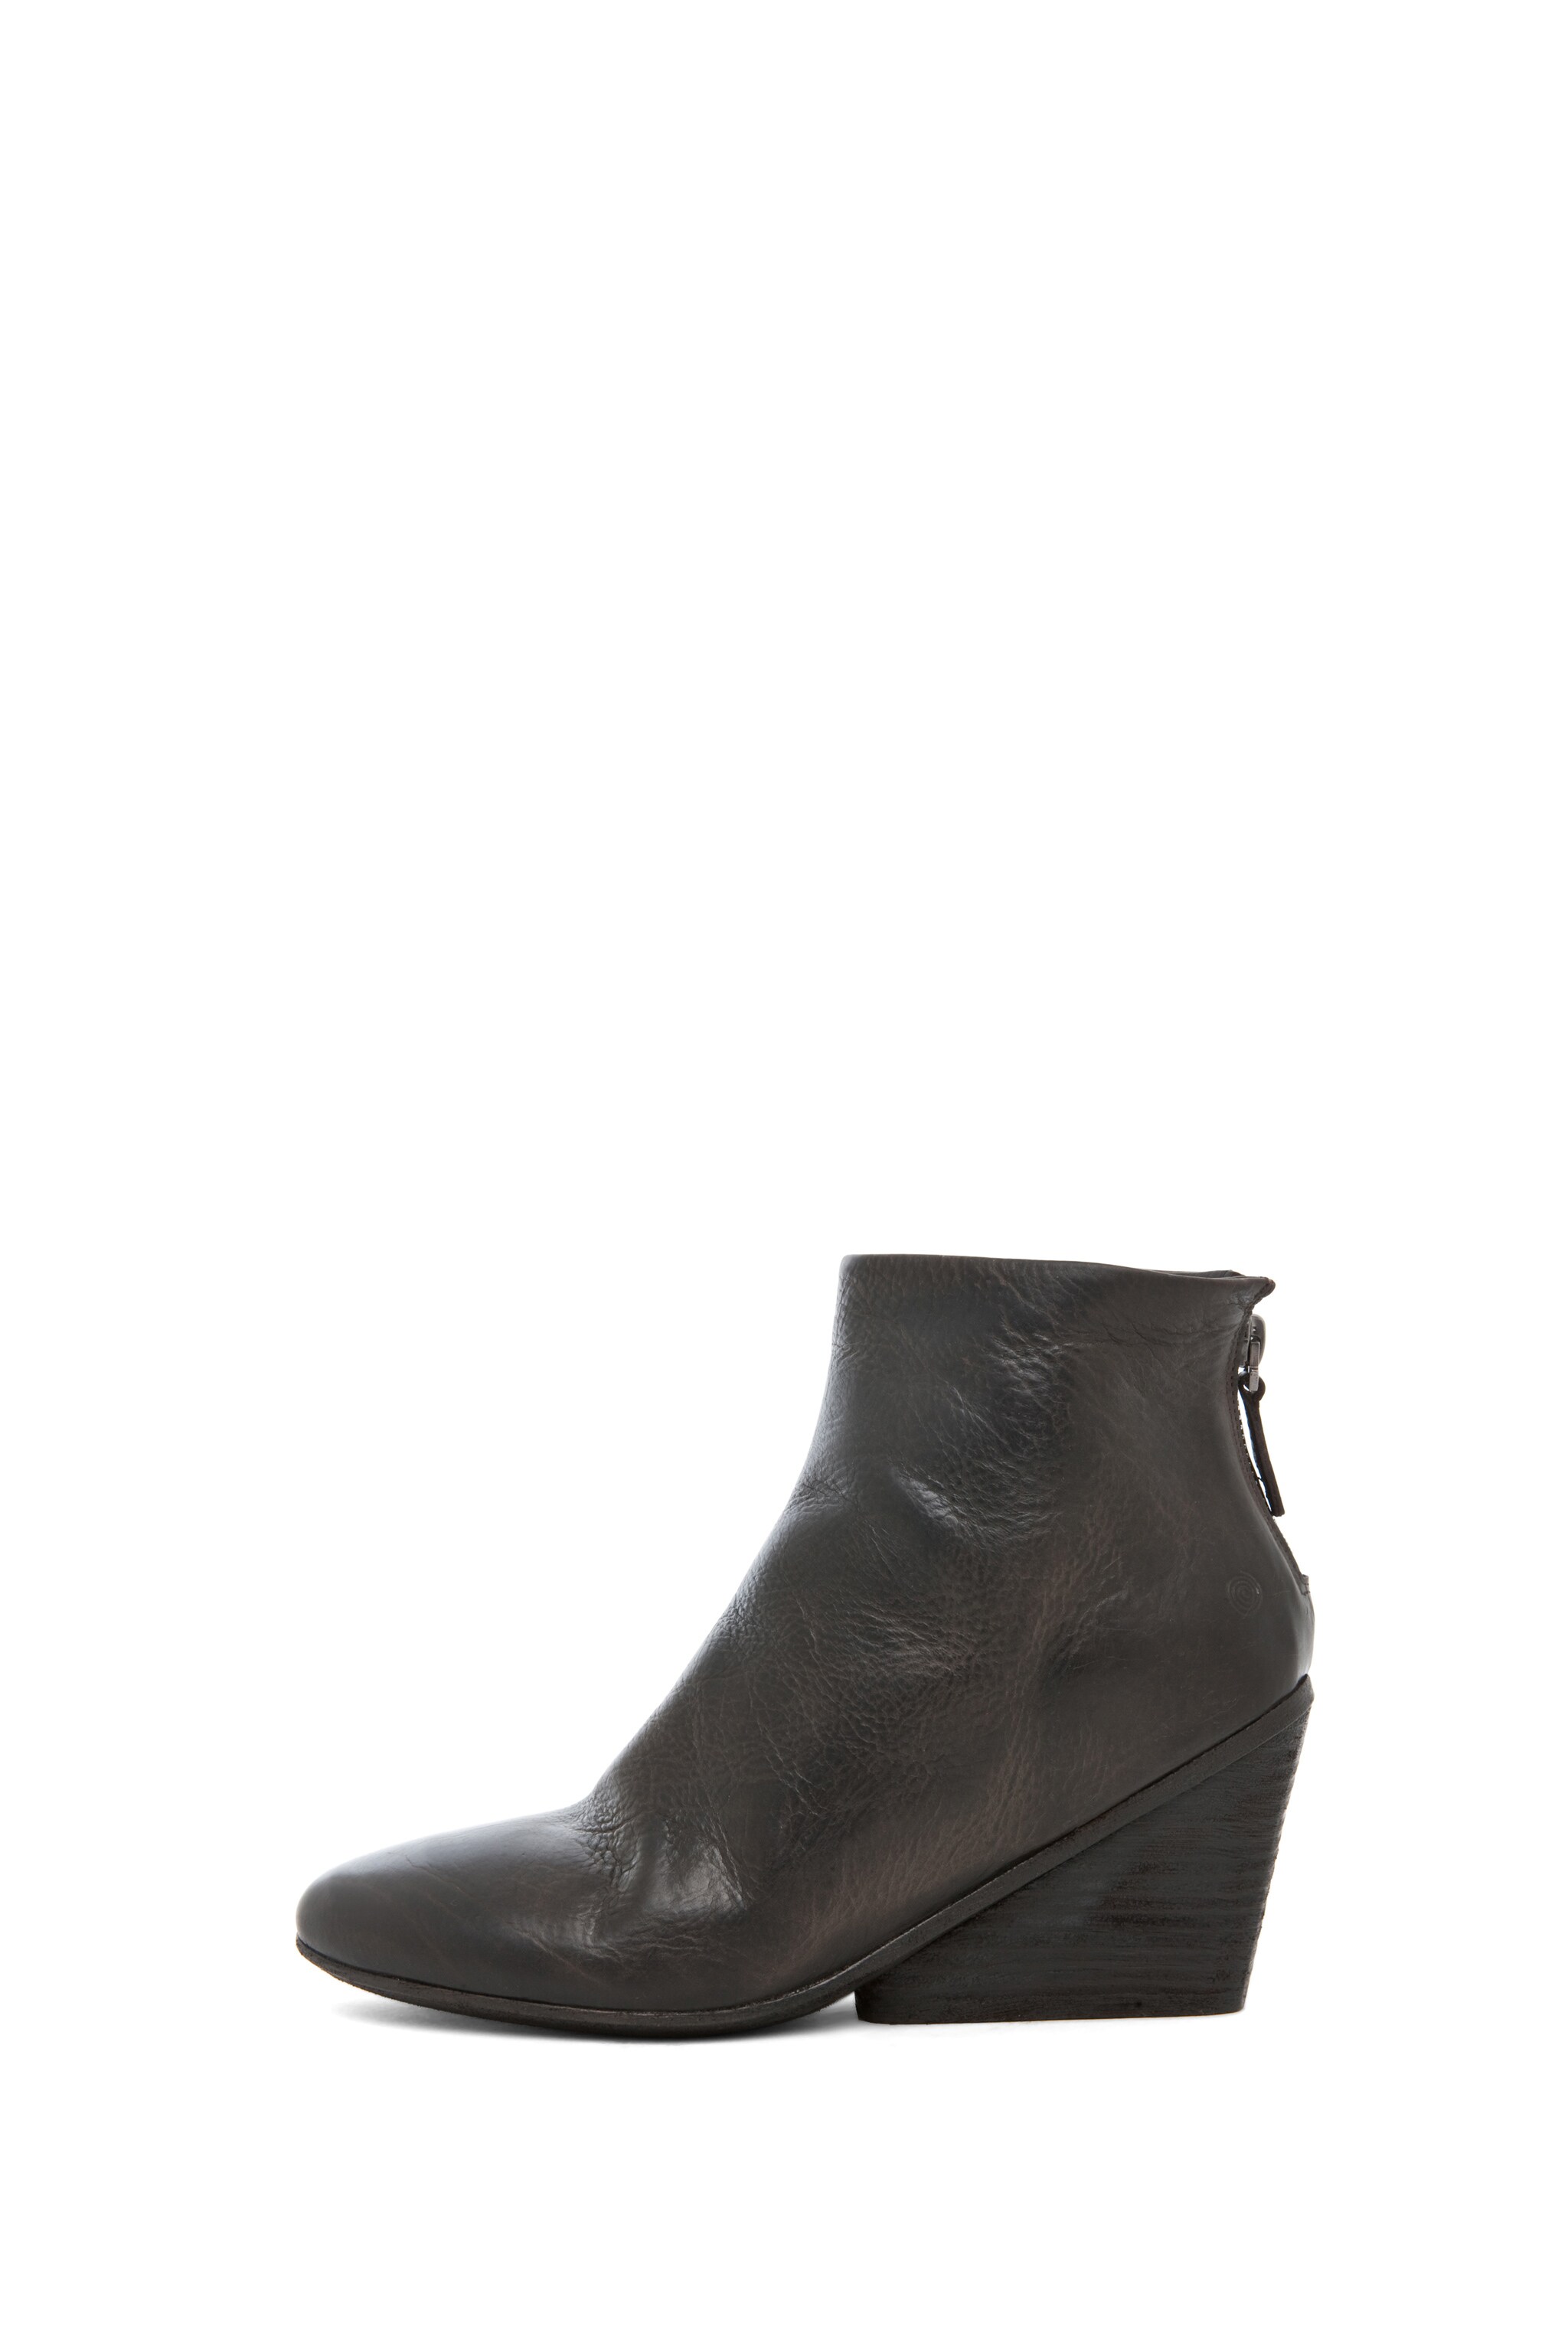 Image 1 of Marsell Pennolina Wedge Bootie in Marcio